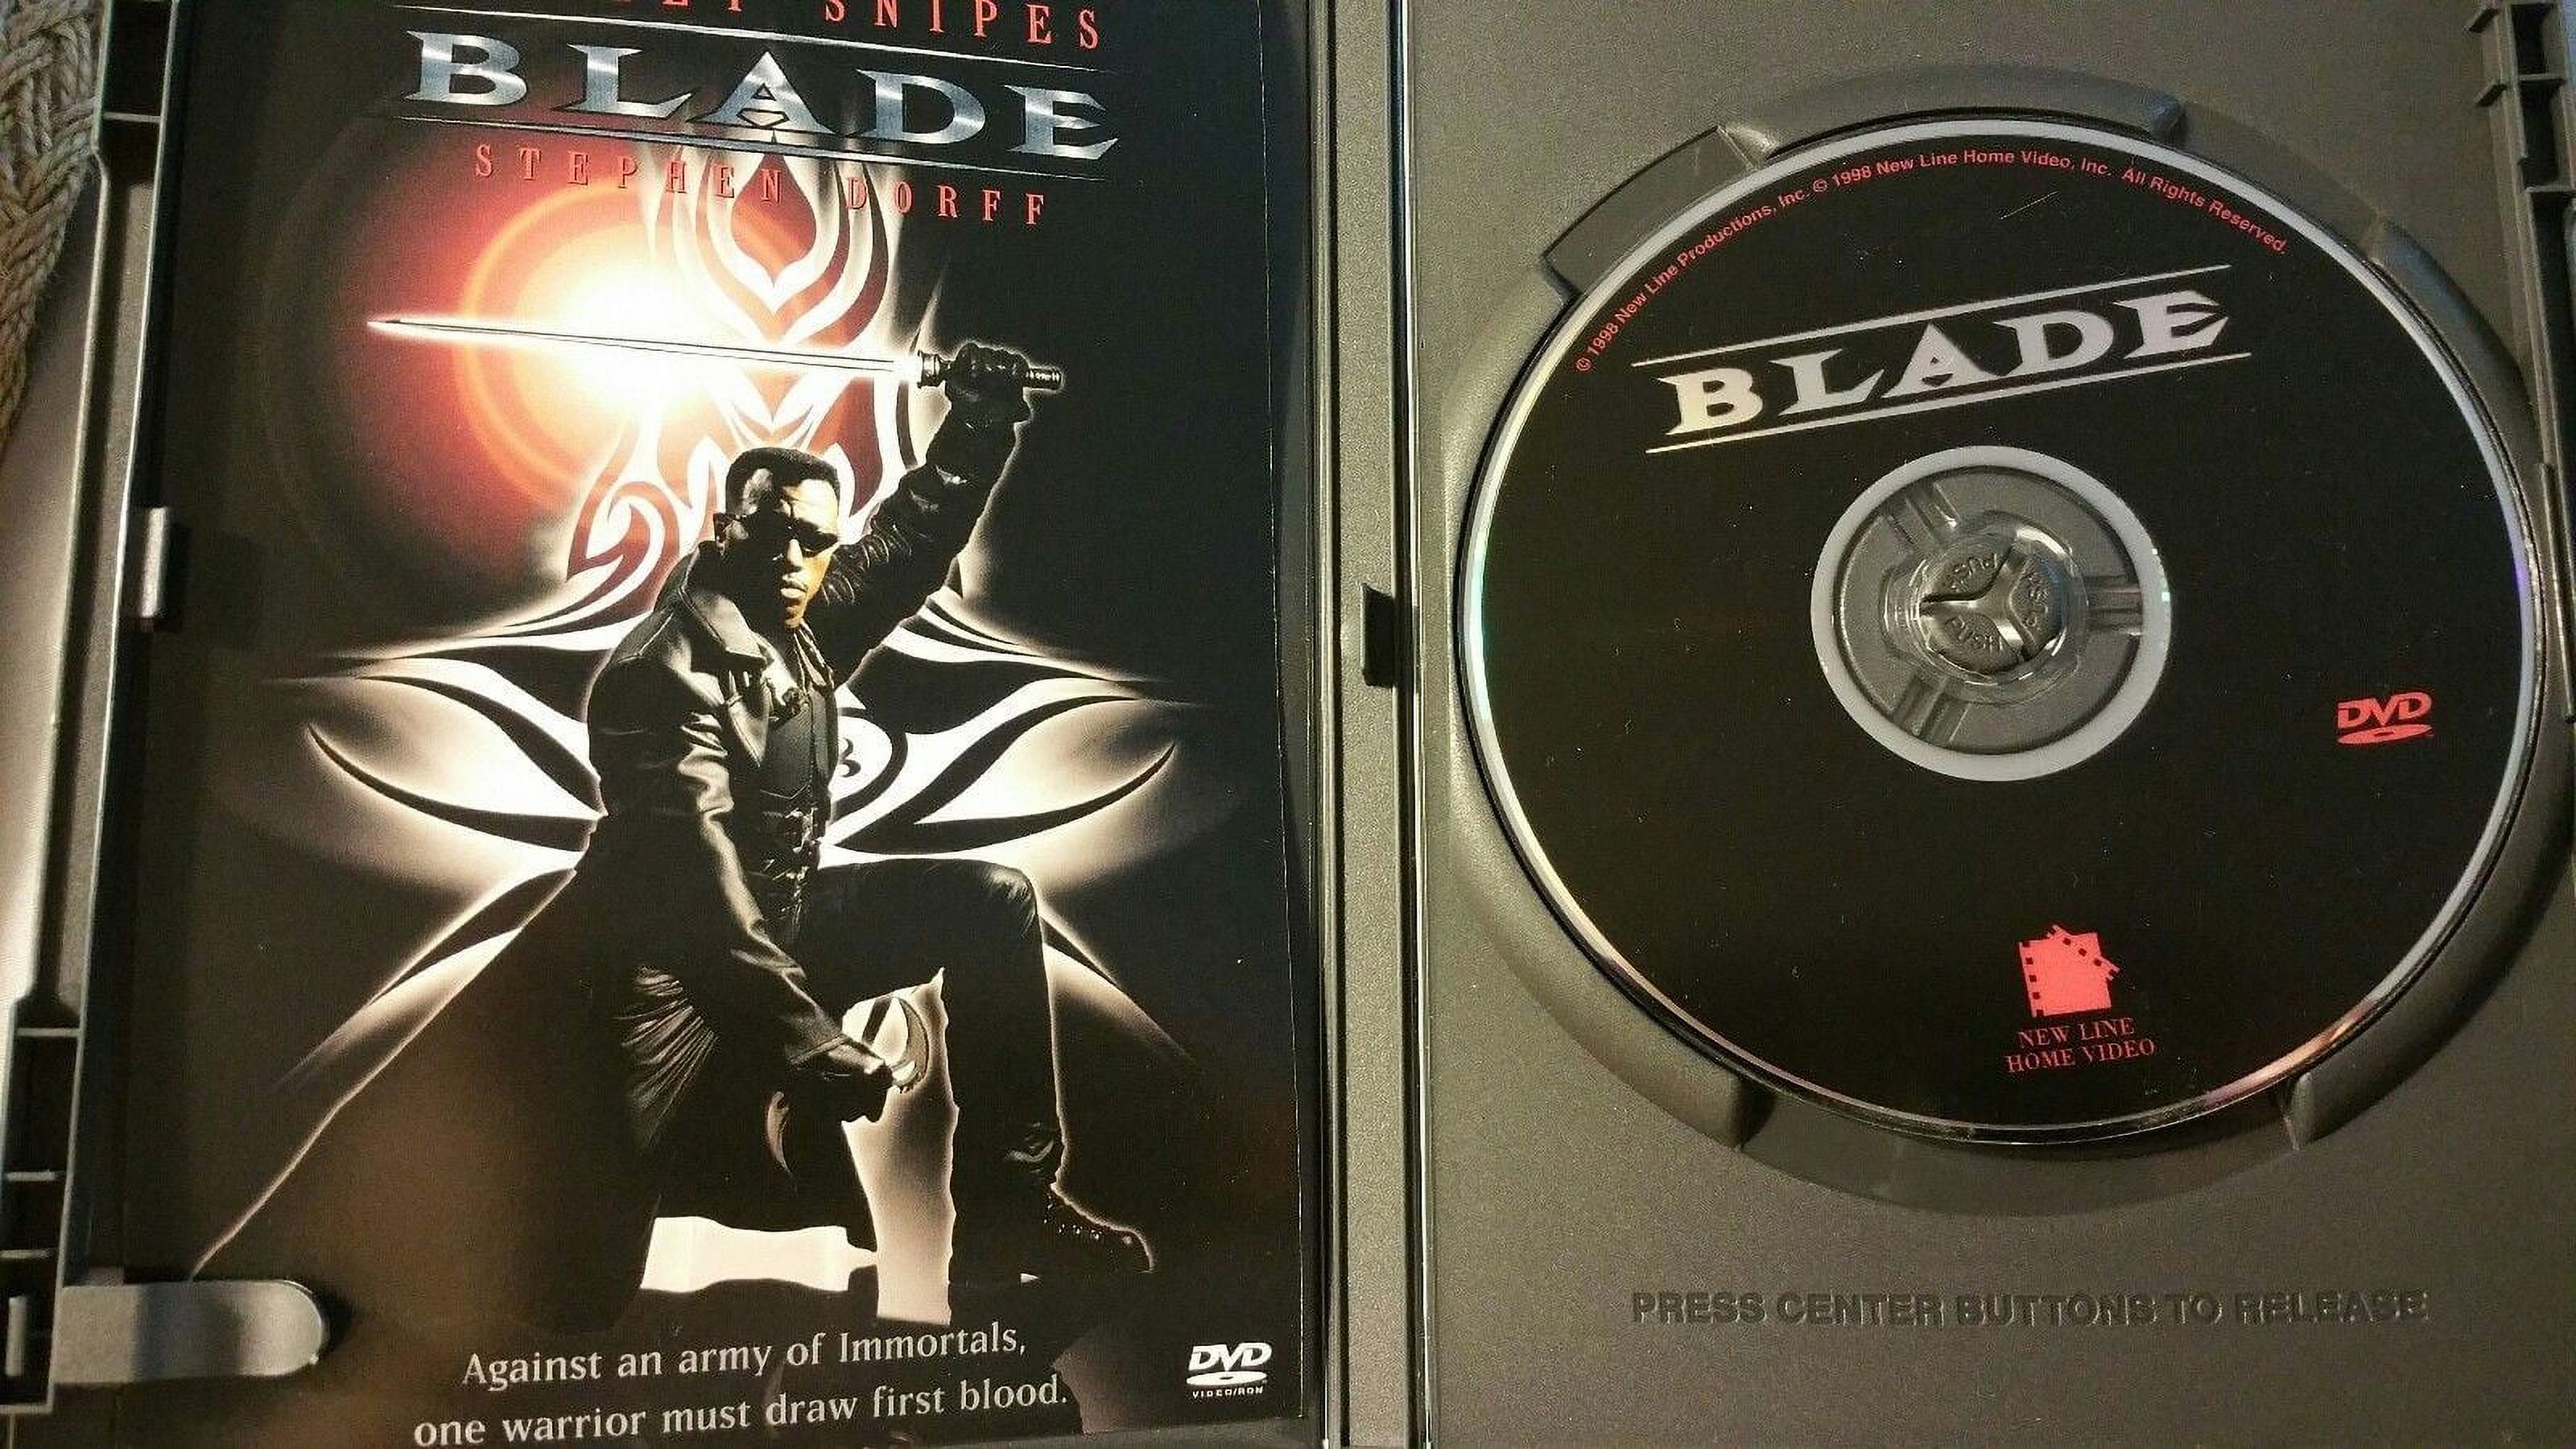 Blade (DVD), New Line Home Video, Horror - image 2 of 5